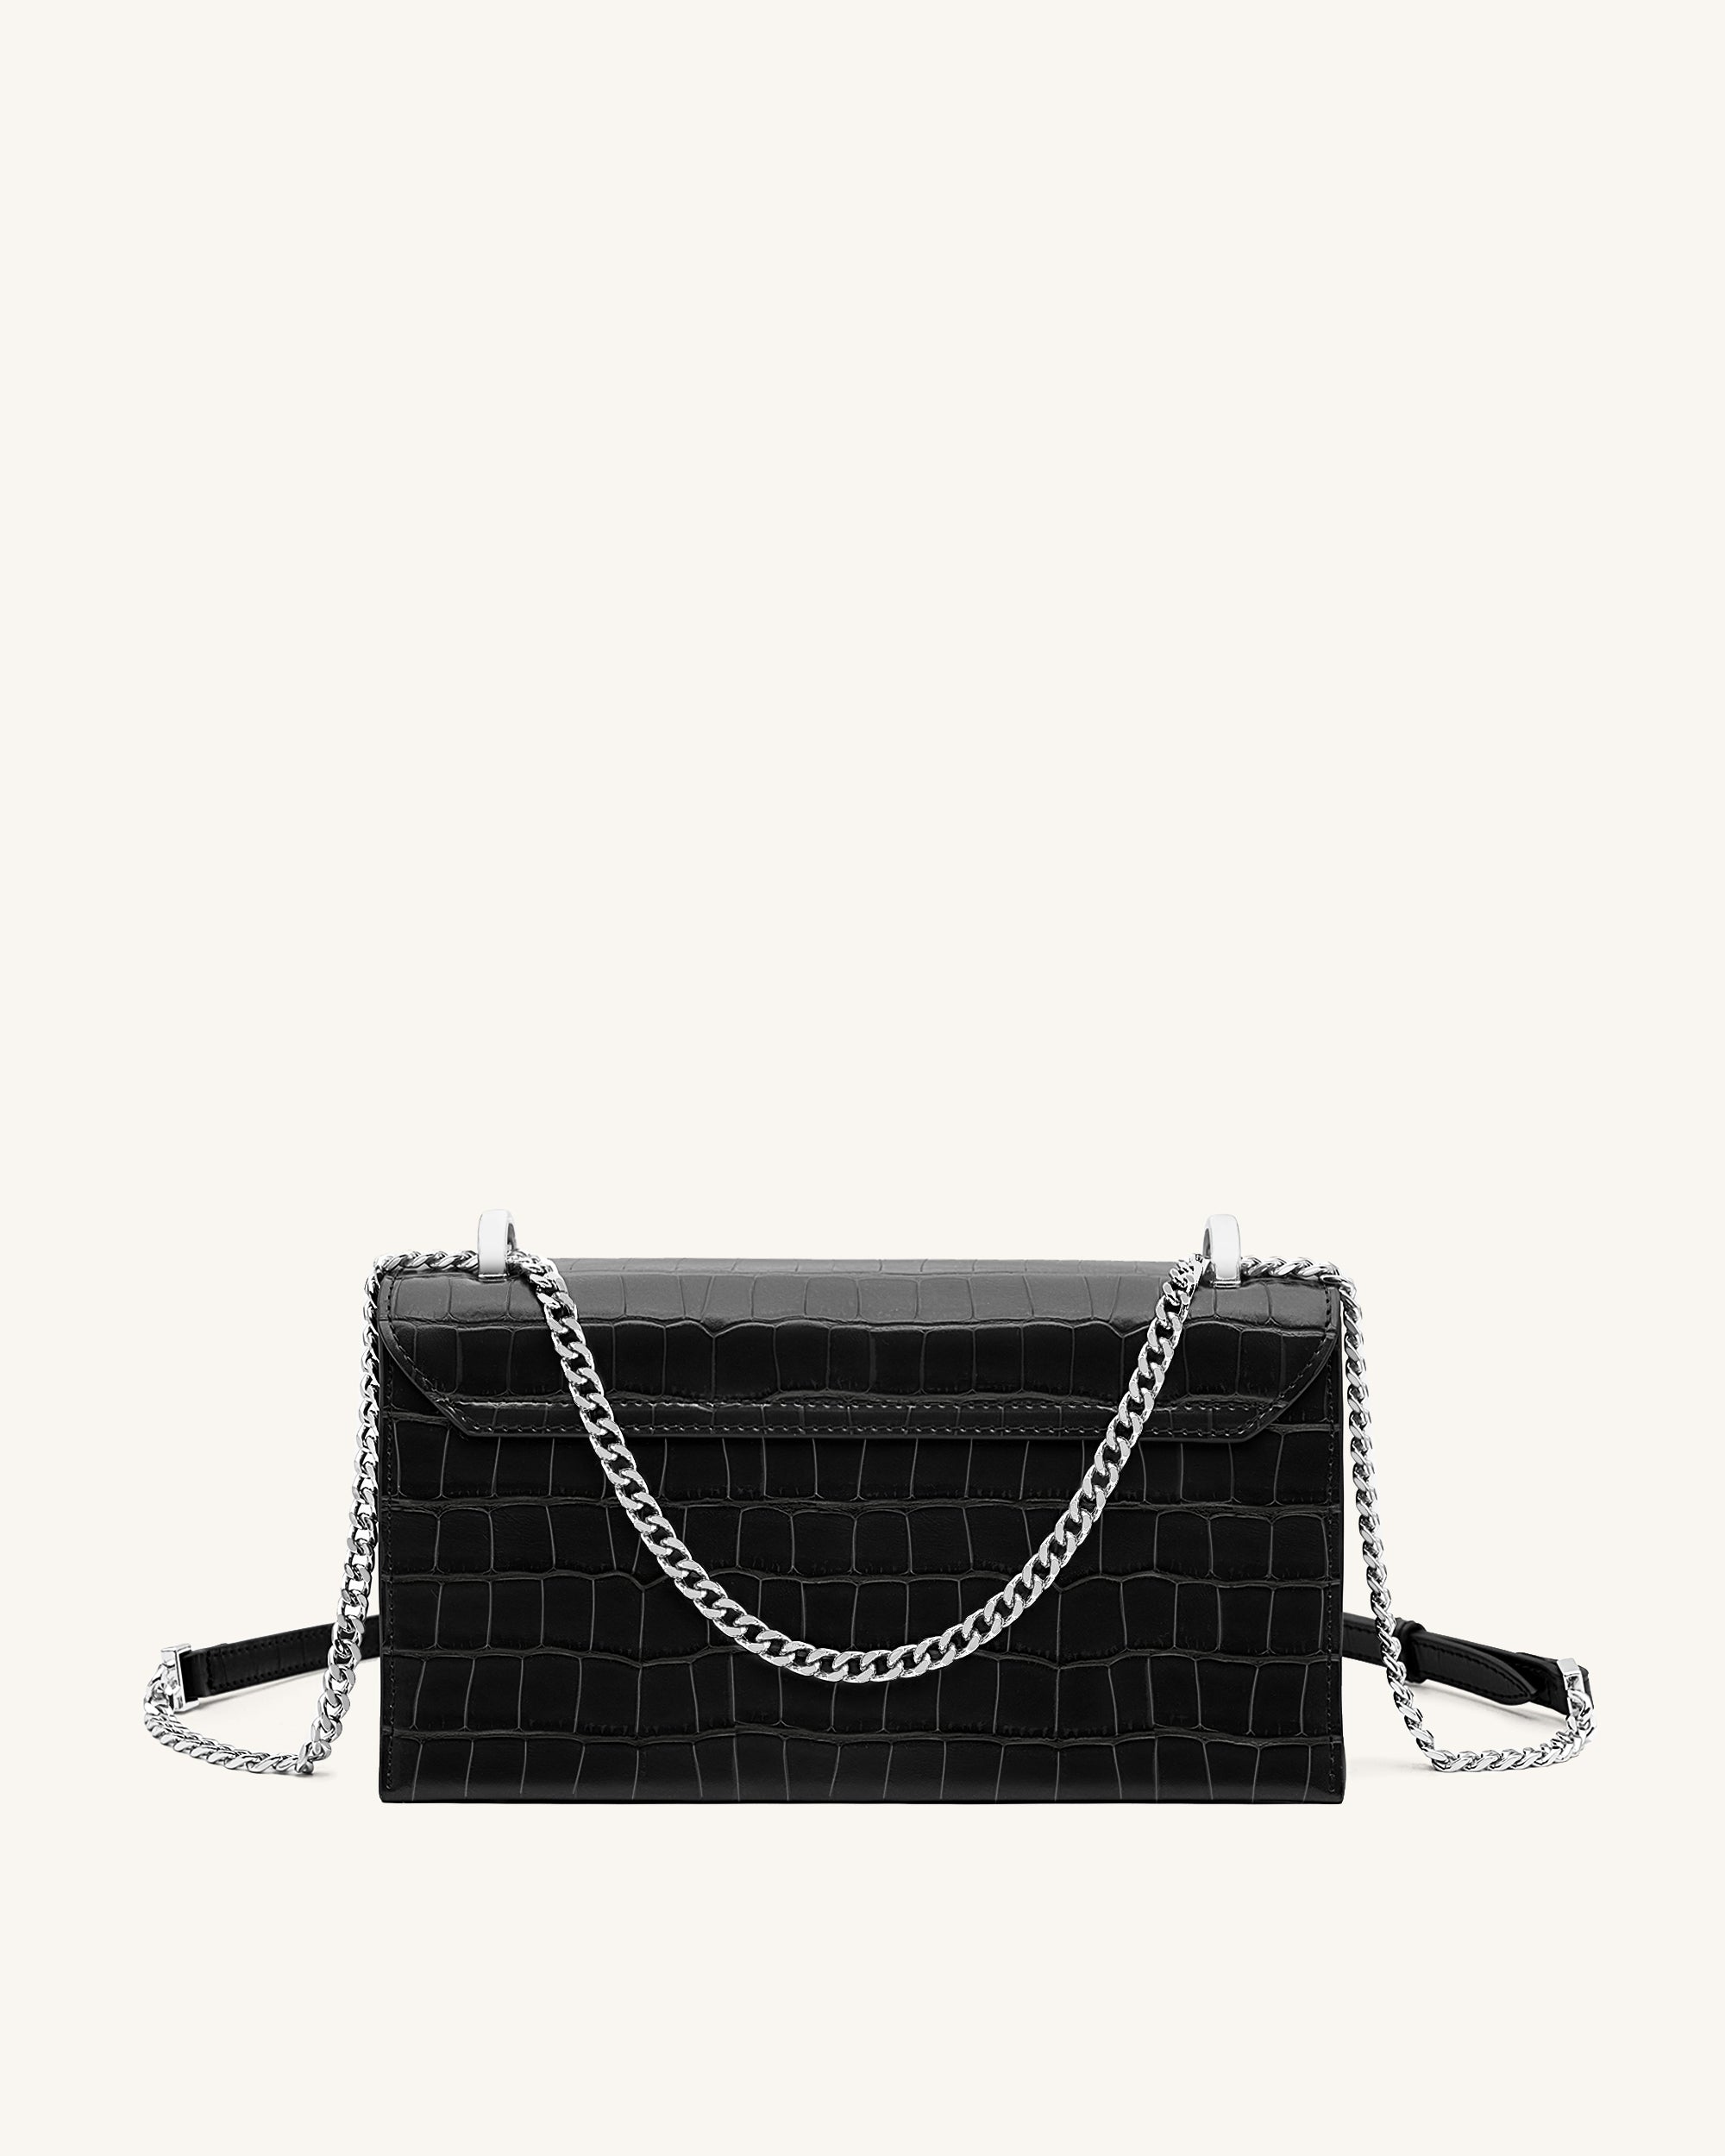 Black Multi-Pouch Bag - CHARLES & KEITH GR